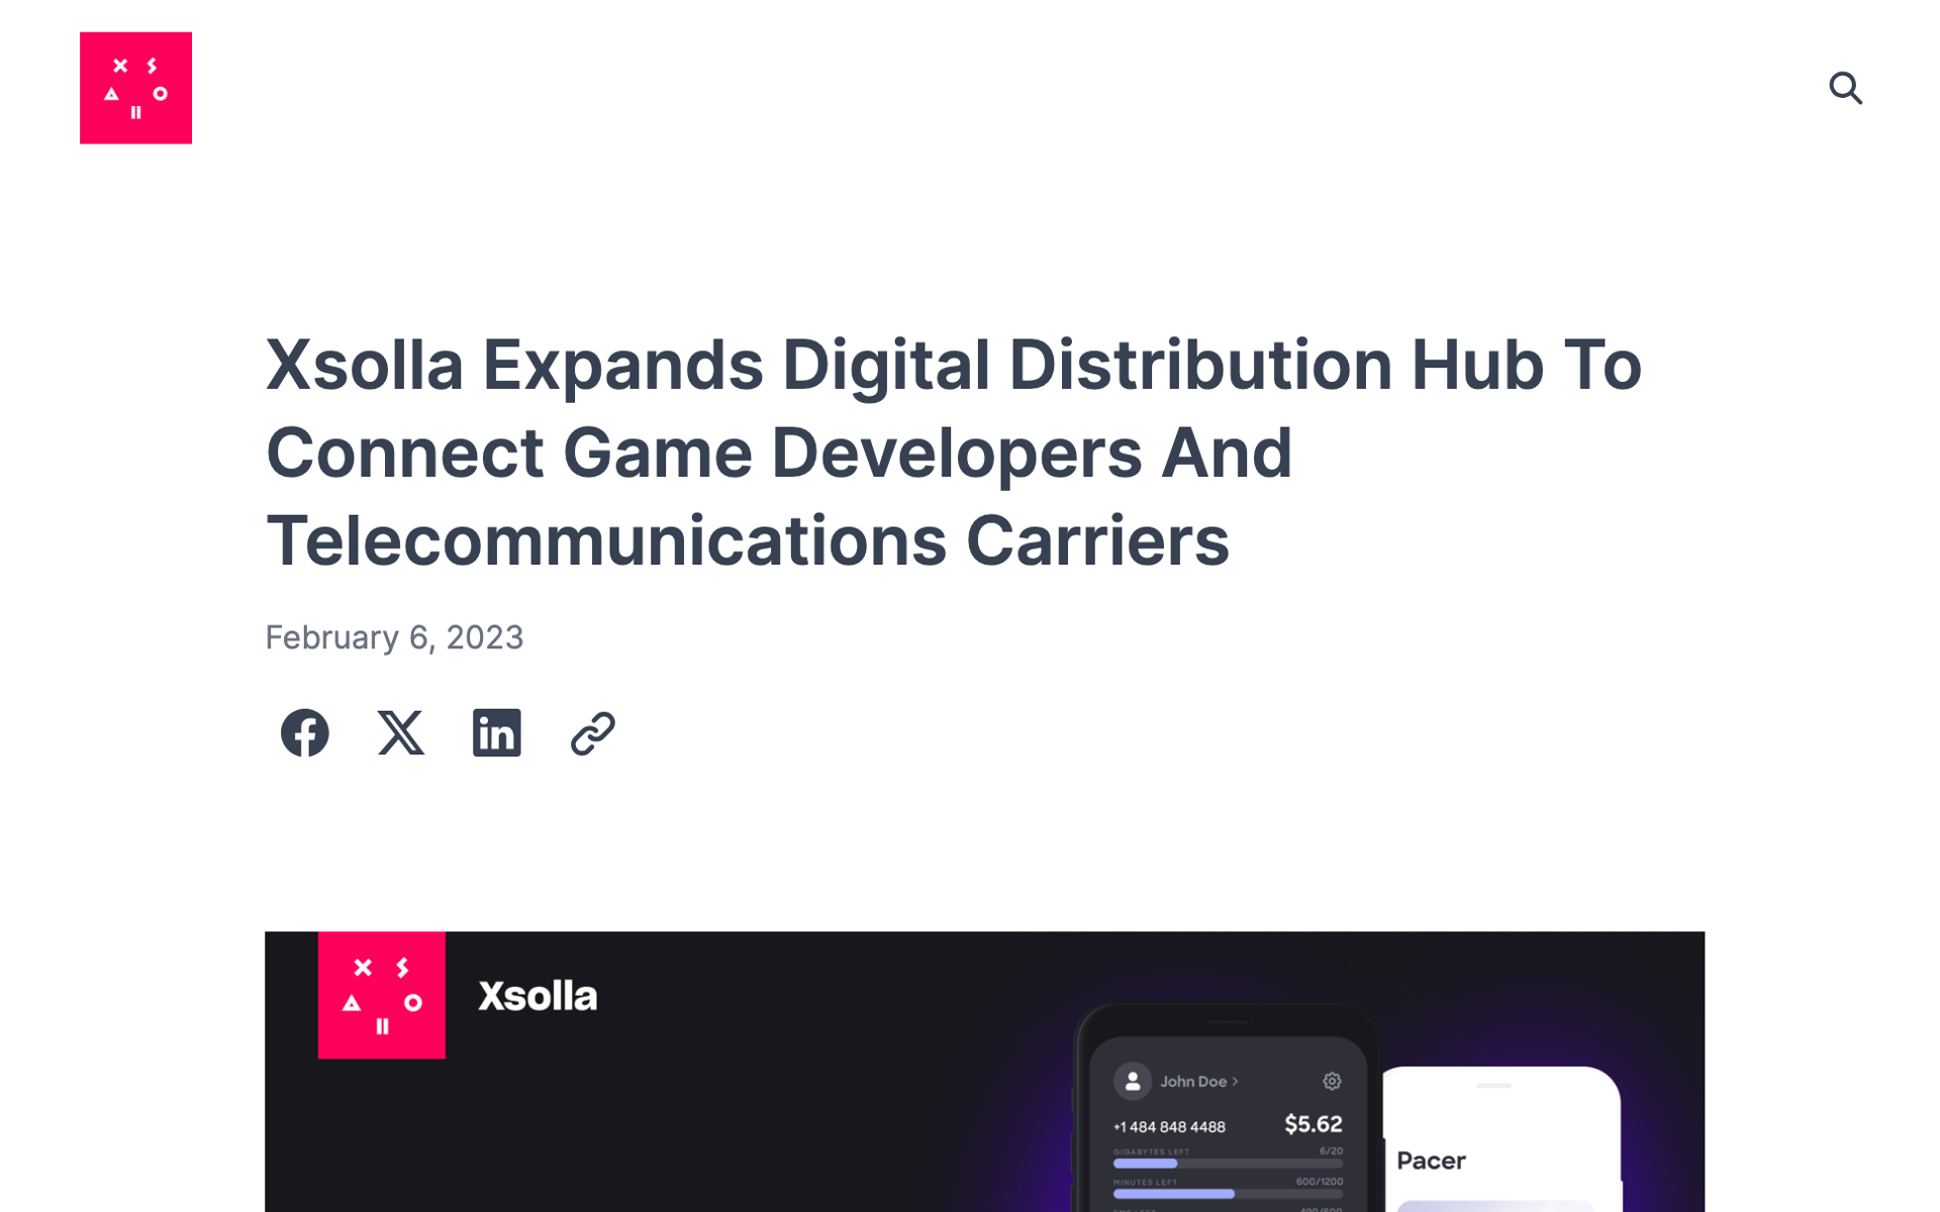 Connecting Game Developers And Telecommunications Carriers